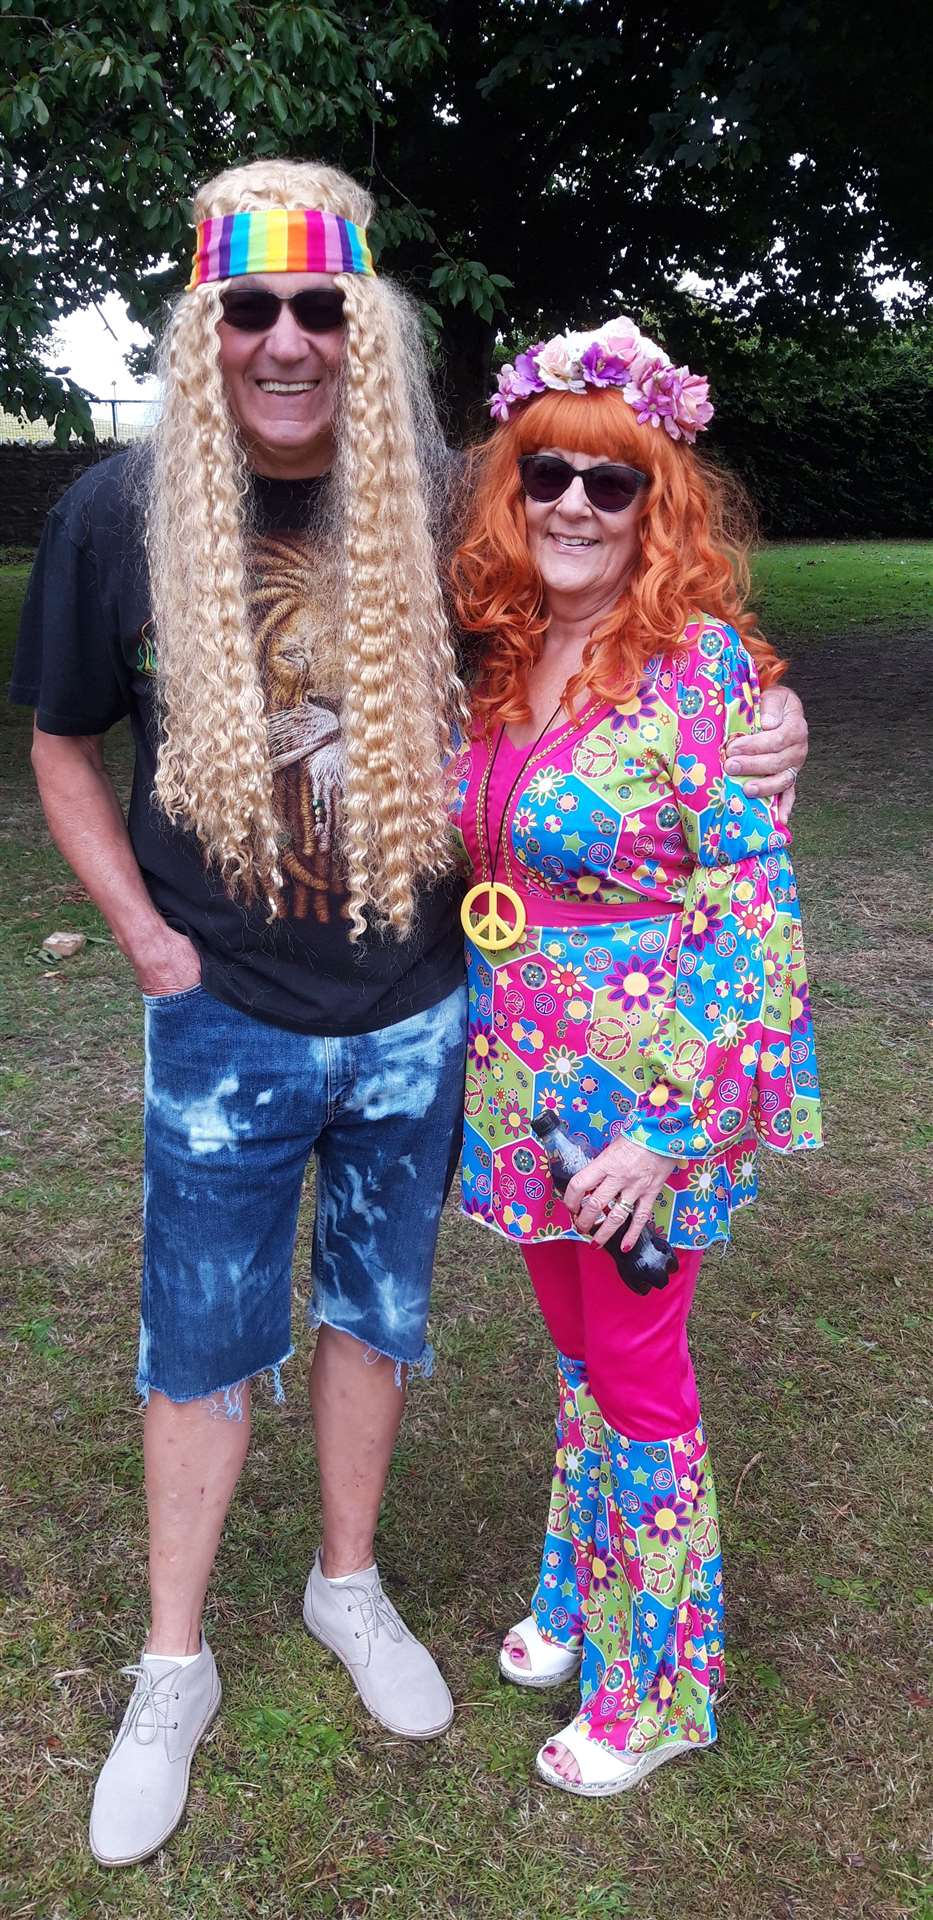 Hippy vibe: William and Vivien MacDougall.